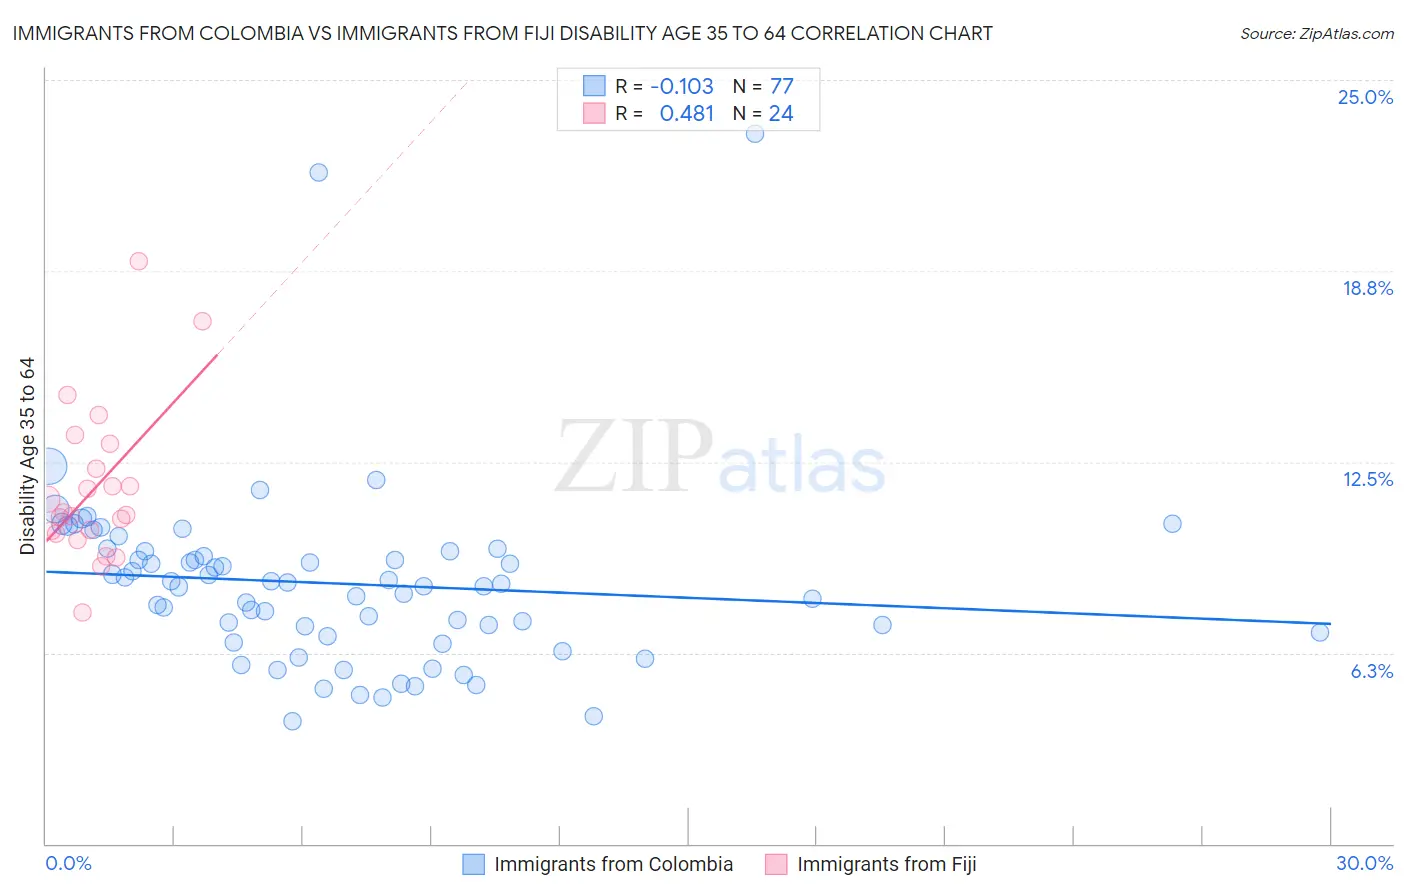 Immigrants from Colombia vs Immigrants from Fiji Disability Age 35 to 64